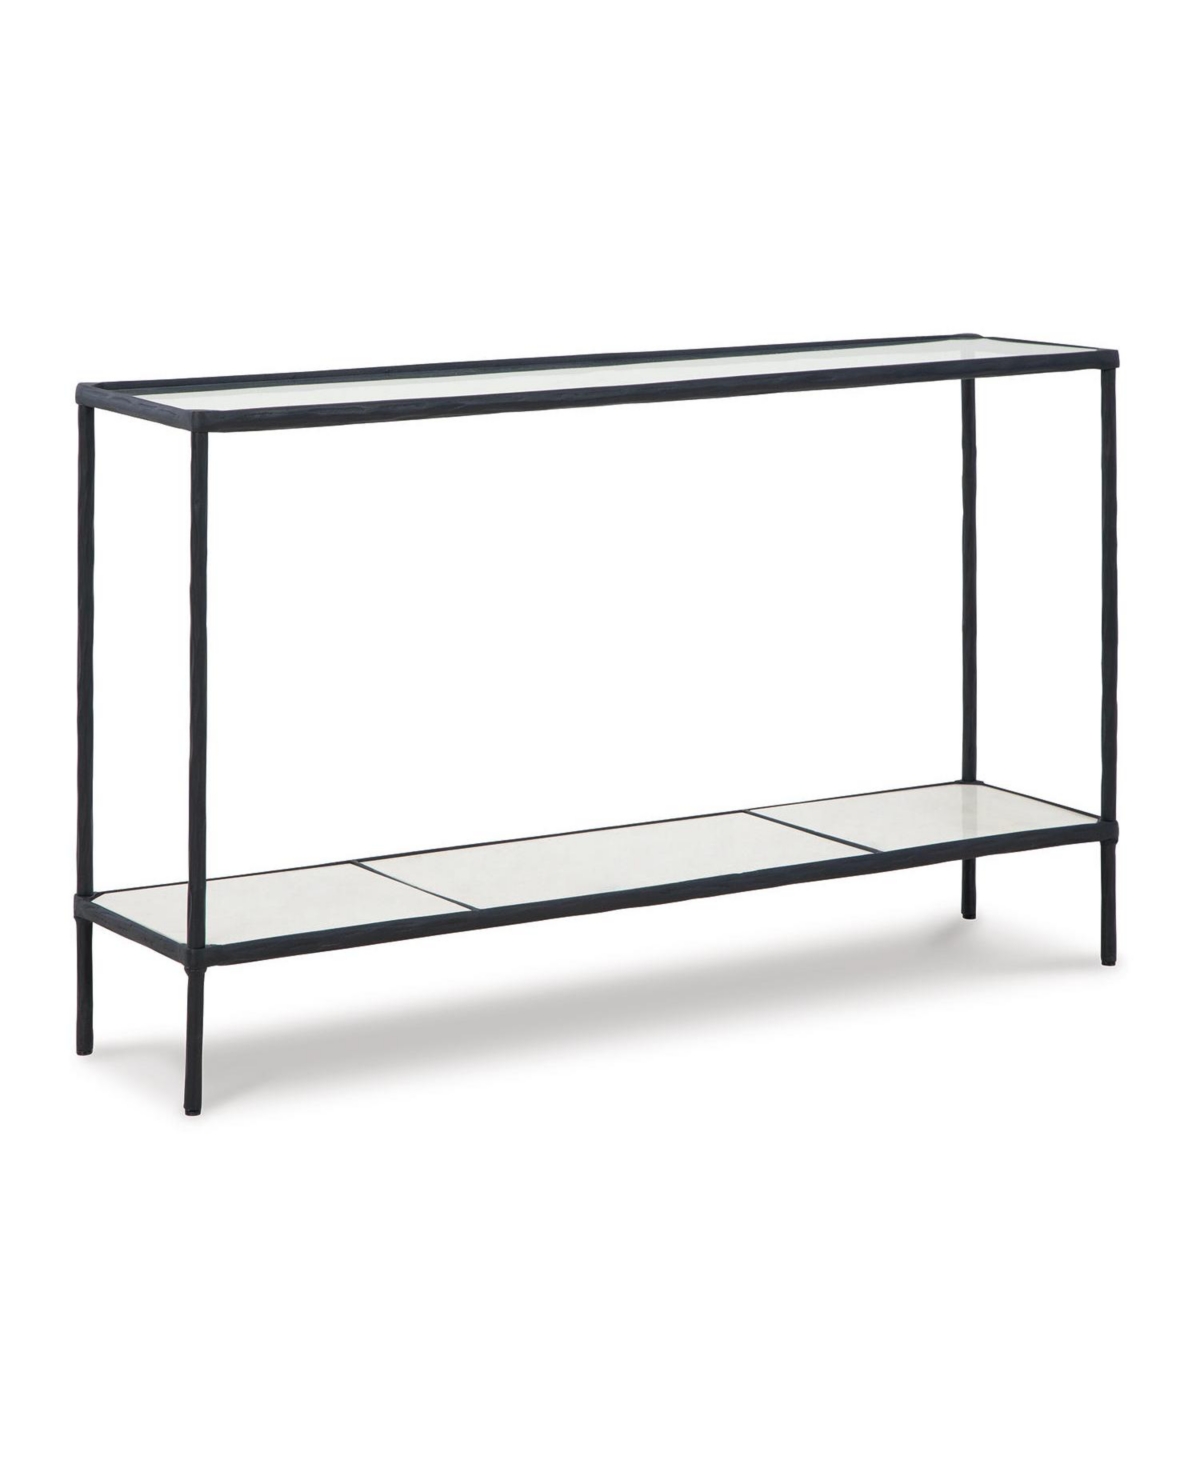 Signature Design By Ashley Ryandale Console Sofa Table In Antique Black